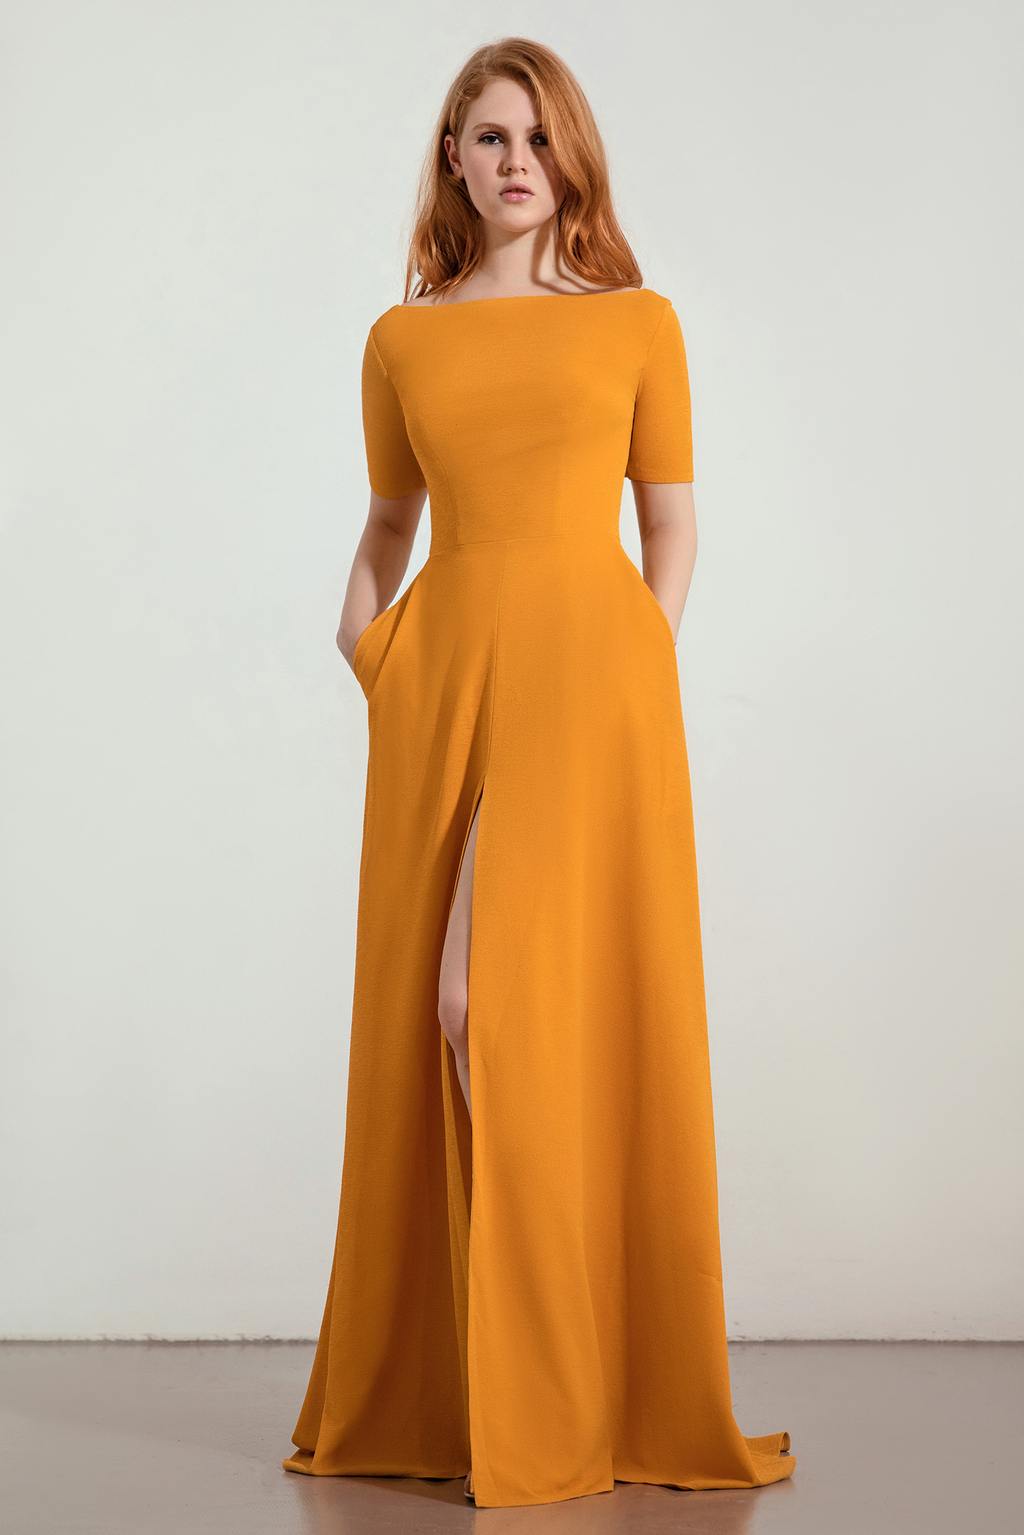 mustard yellow bridesmaid dress with boat neck and high slit